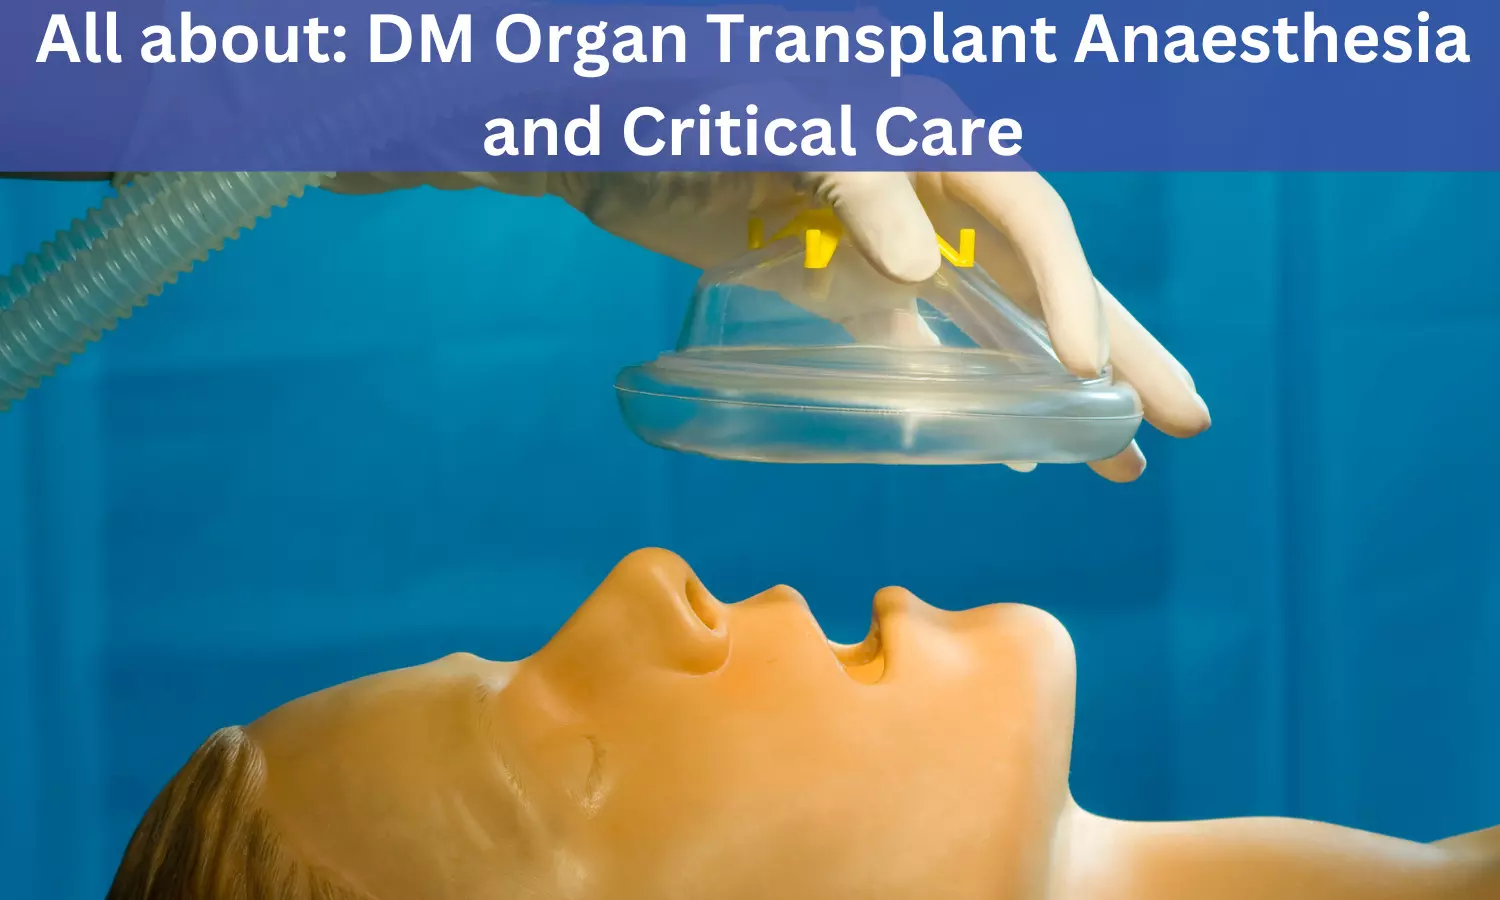 DM Organ Transplant Anaesthesia and Critical Care: Admissions, Medical Colleges, Fees, Eligibility Criteria details here